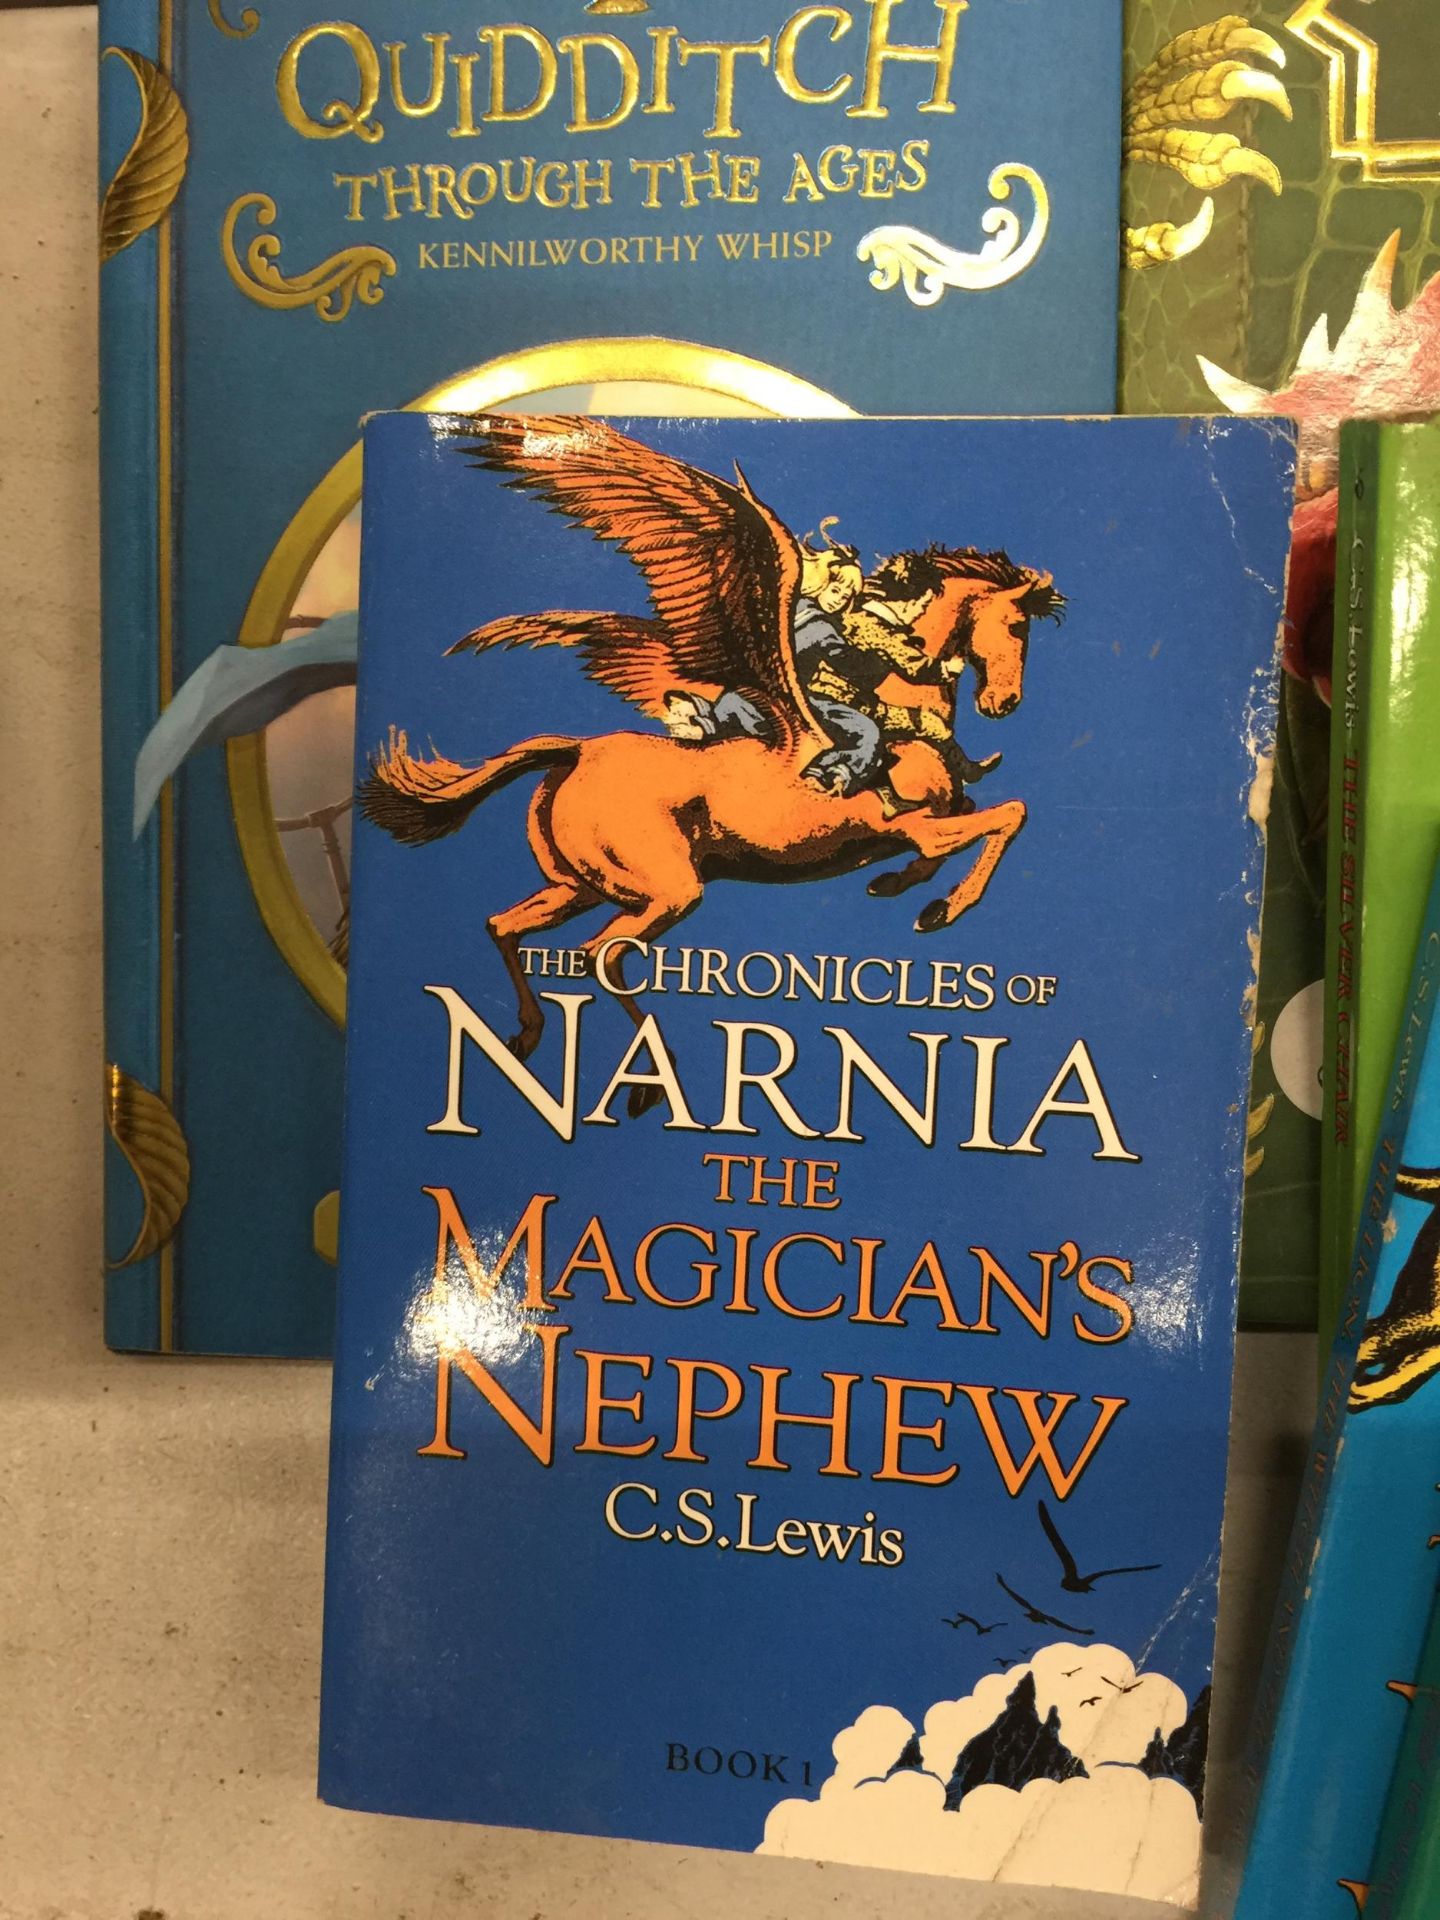 FIVE C. S. LEWIS CHRONICLES OF NARNIA PAPERBACKS PLUS TWO J. K. ROWLING BOOKS - Image 3 of 6